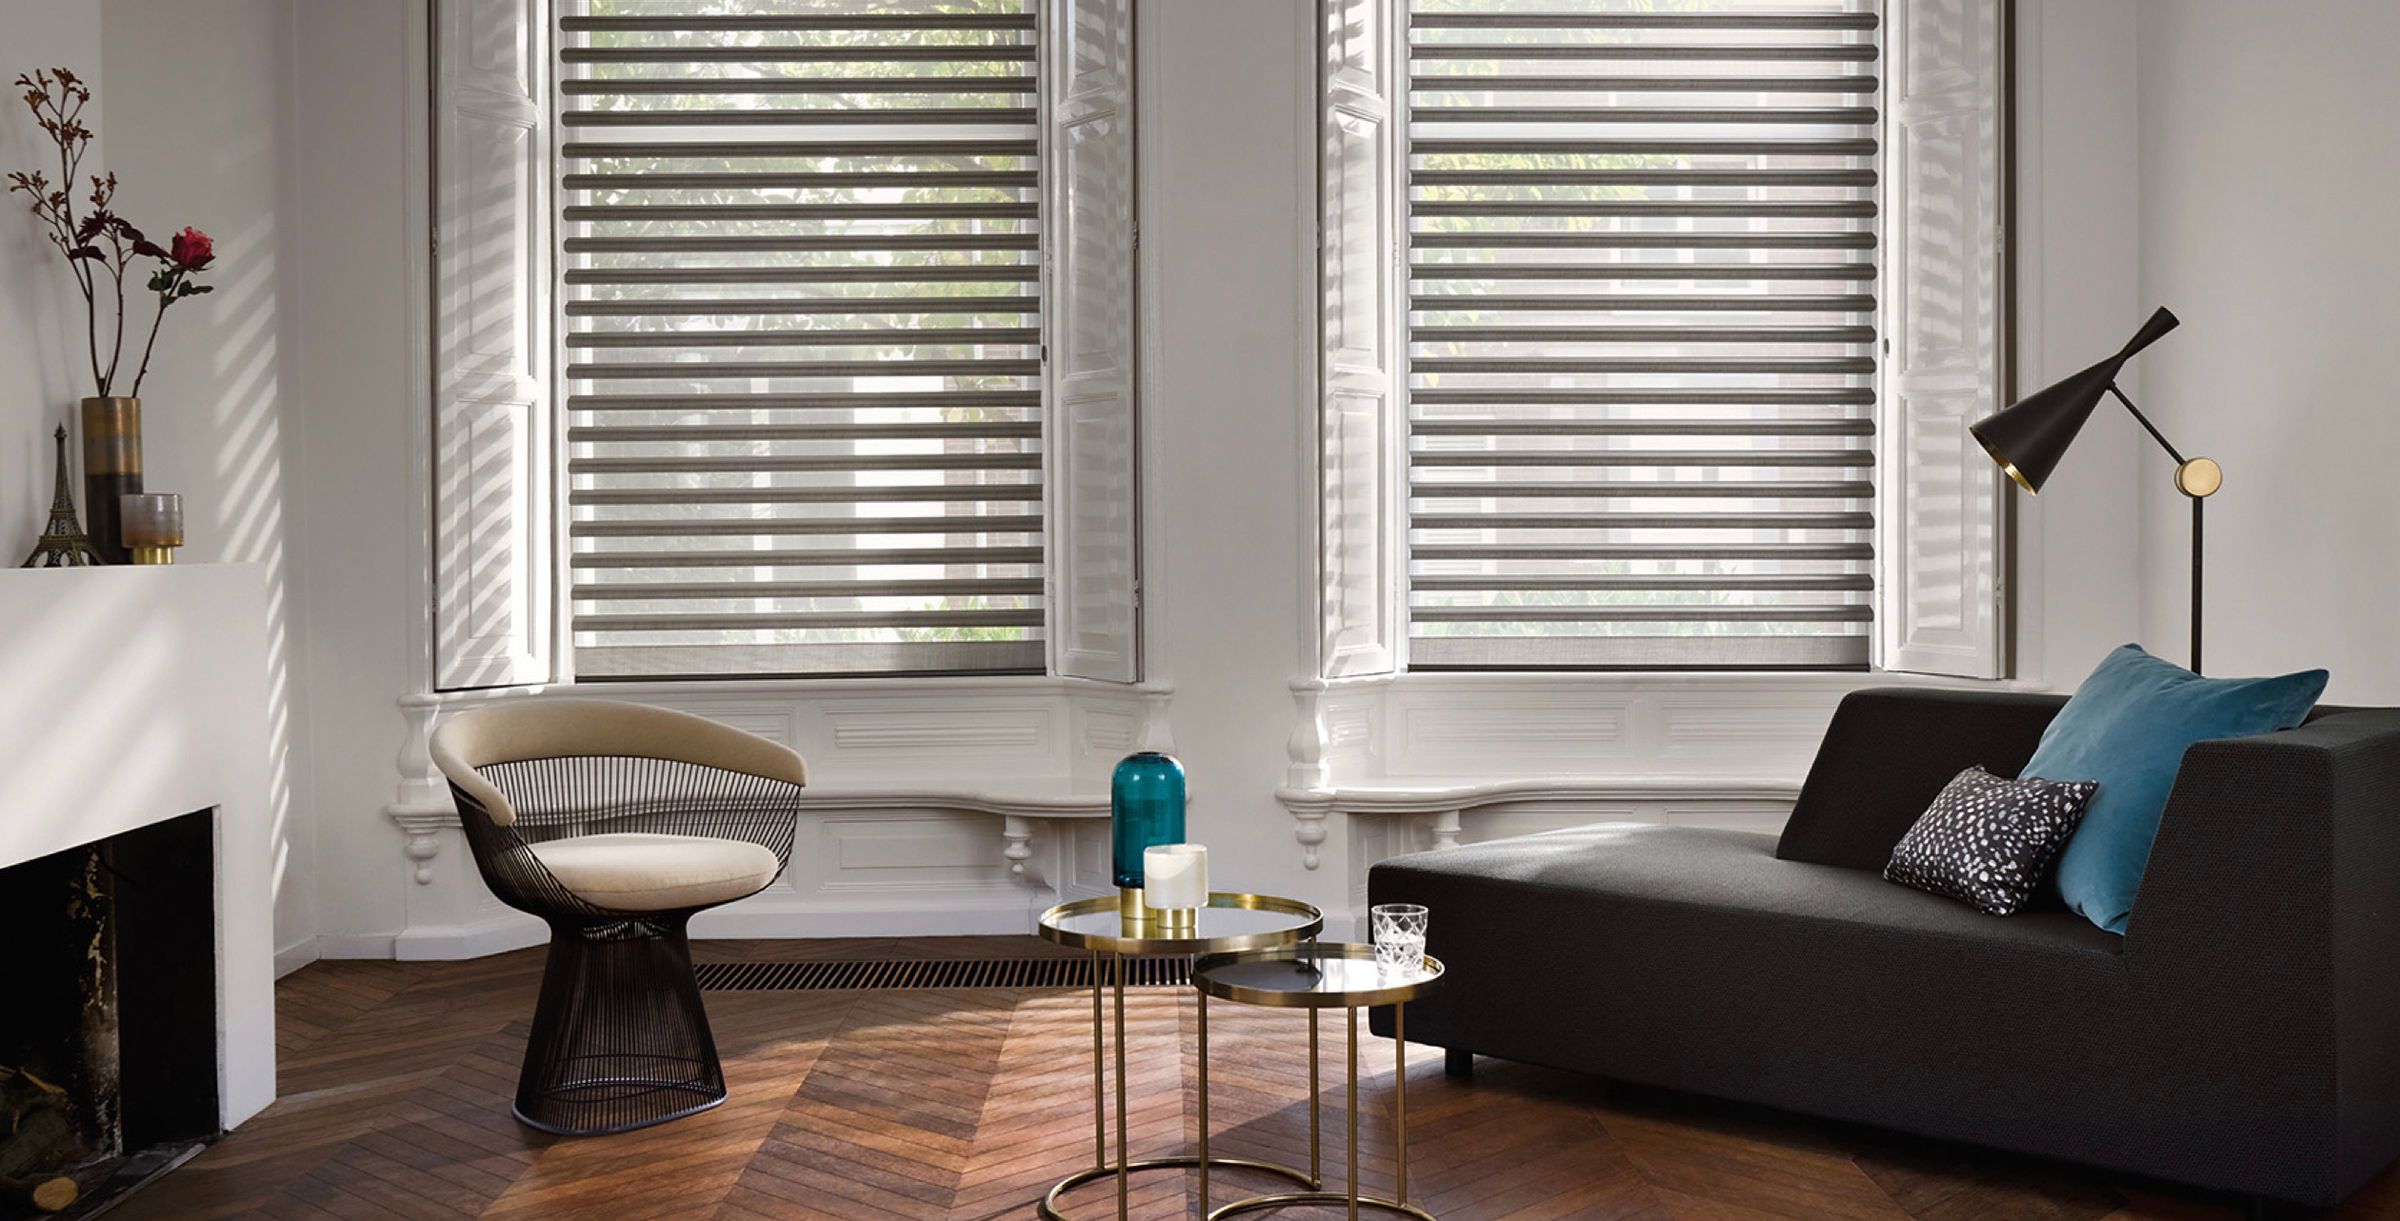 Image of a livingroom with fitted blinds at the windows